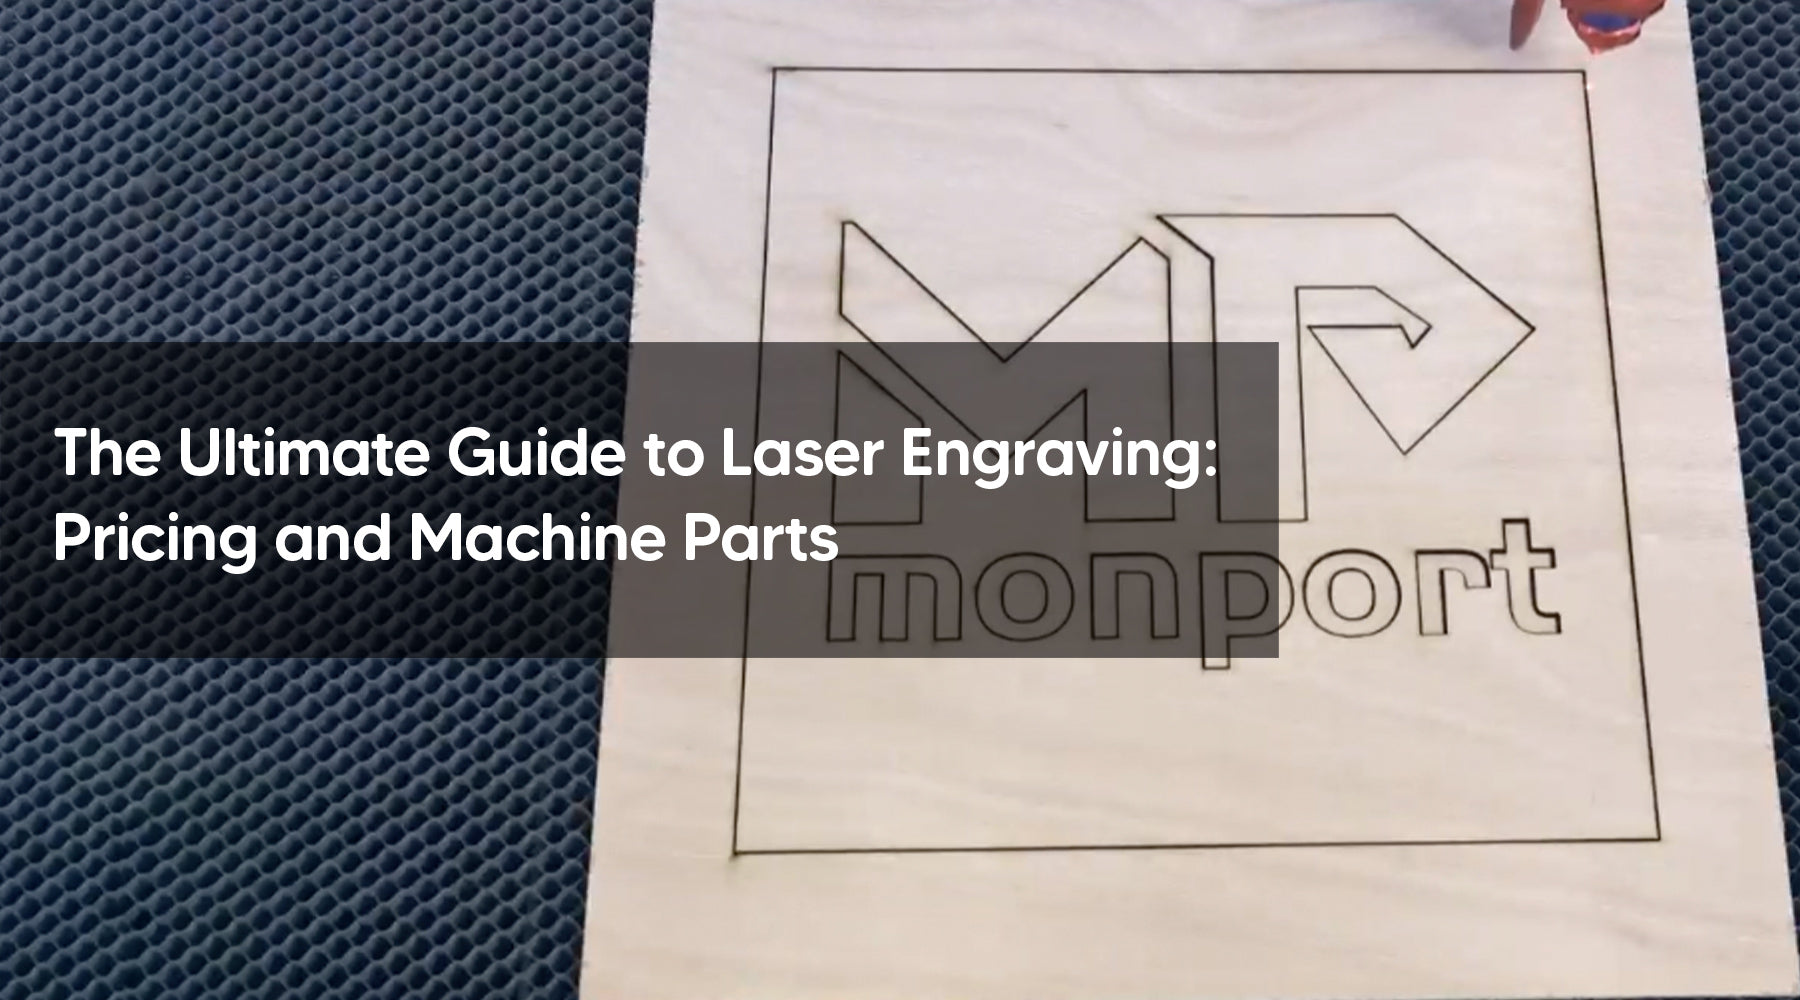 The Ultimate Guide to Laser Engraving: Pricing and Machine Parts